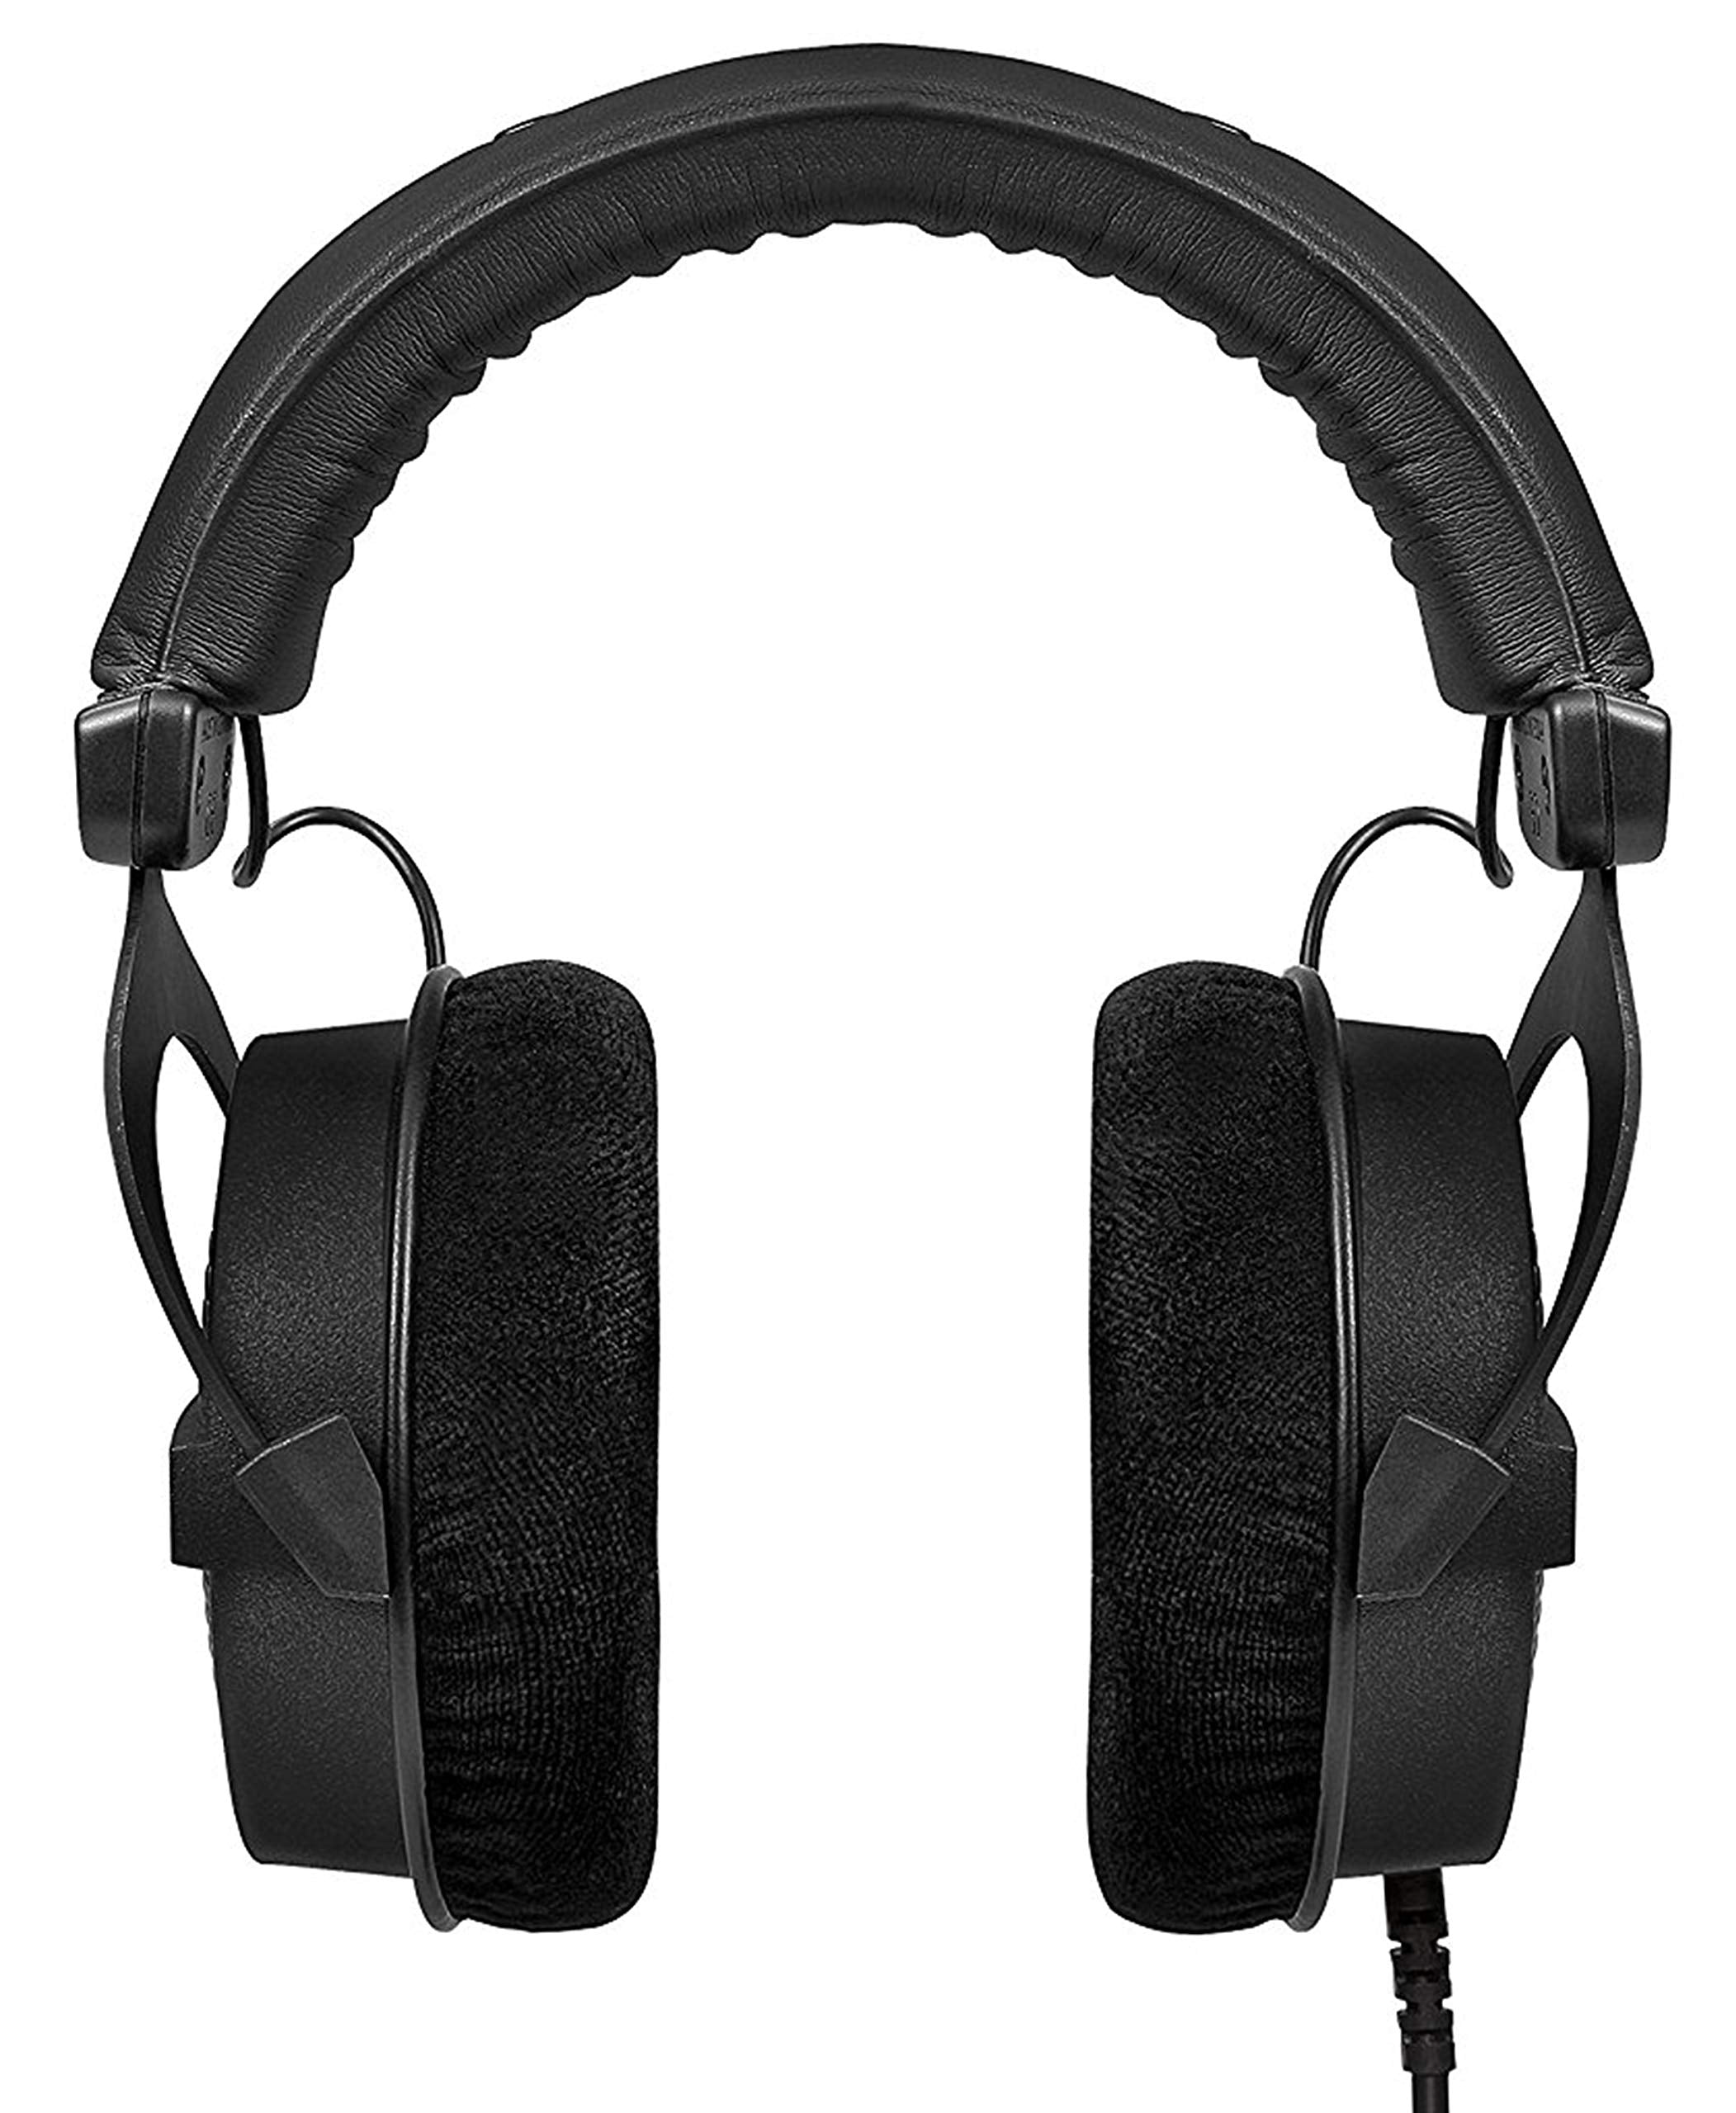 beyerdynamic Dt 990 Pro Over-Ear Studio Monitor Headphones - Open-Back Stereo Construction, Wired (80 Ohm, Black (Limited Edition)) (7579047952622)